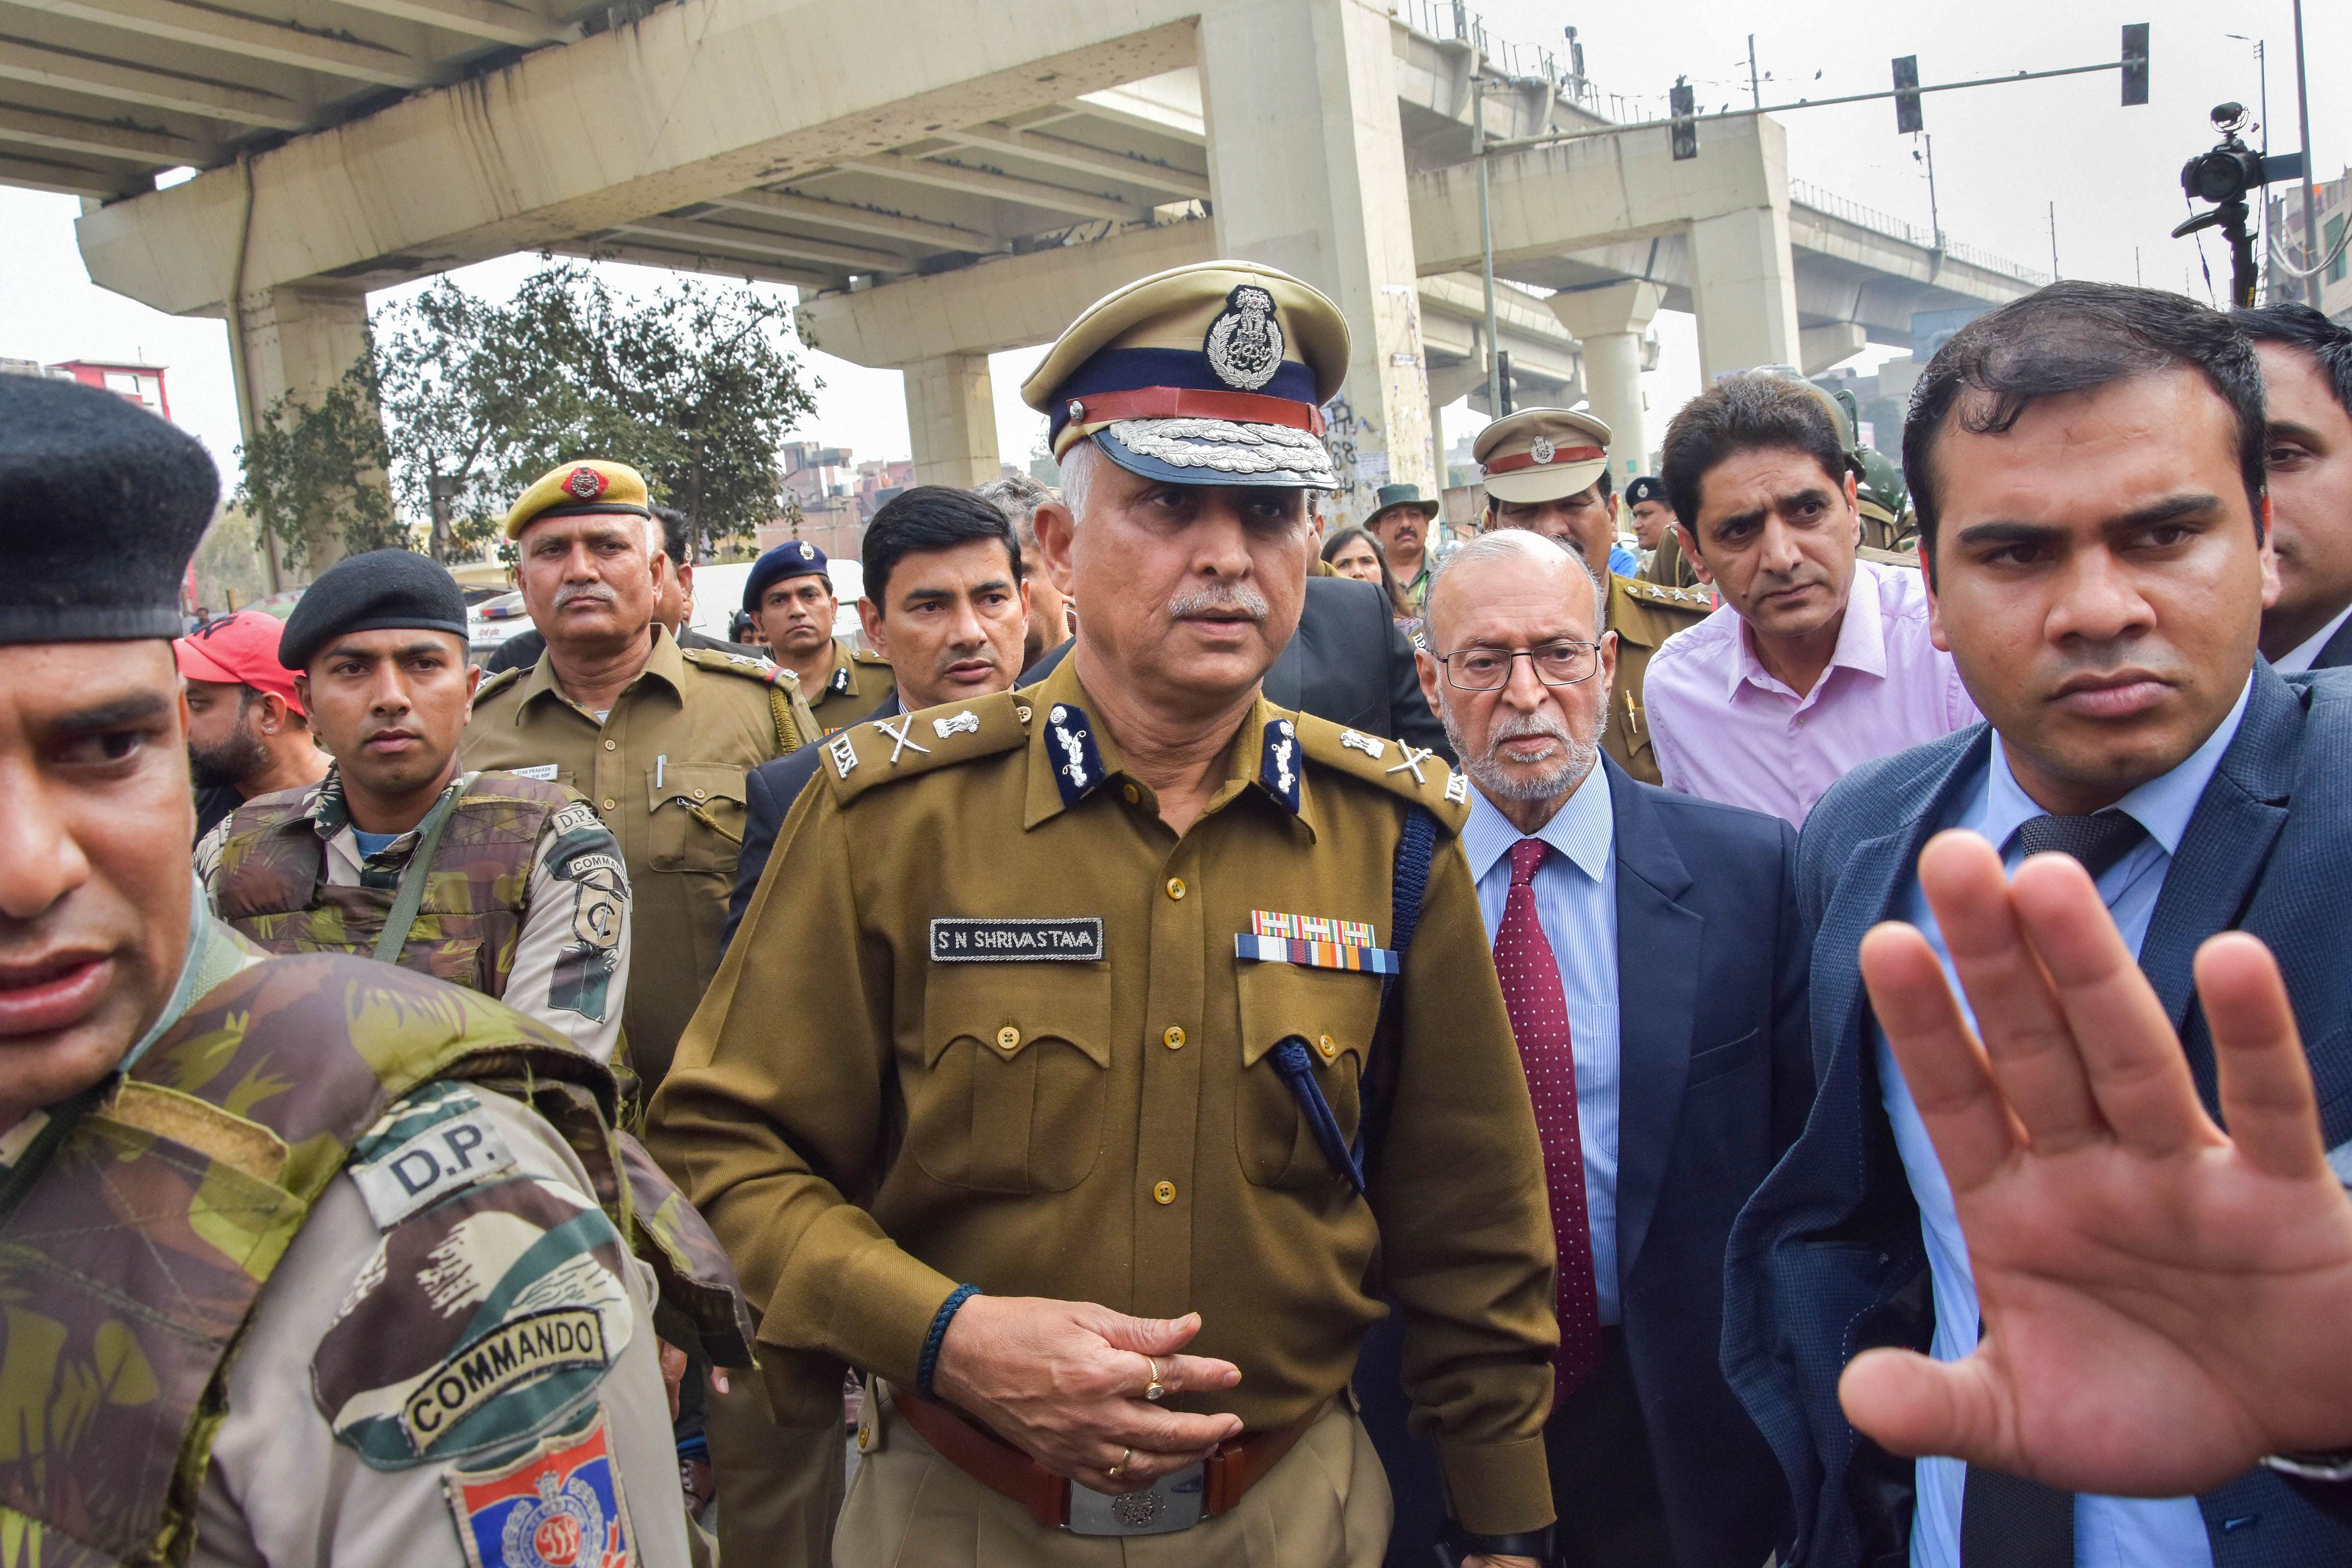 Delhi Police Commissioner S N Shrivastava (C) along with Lt Governor Anil Baijal (C on R) inspects Maujpur Chowk area of the riot-affected northeast Delhi. (PTI Photo)